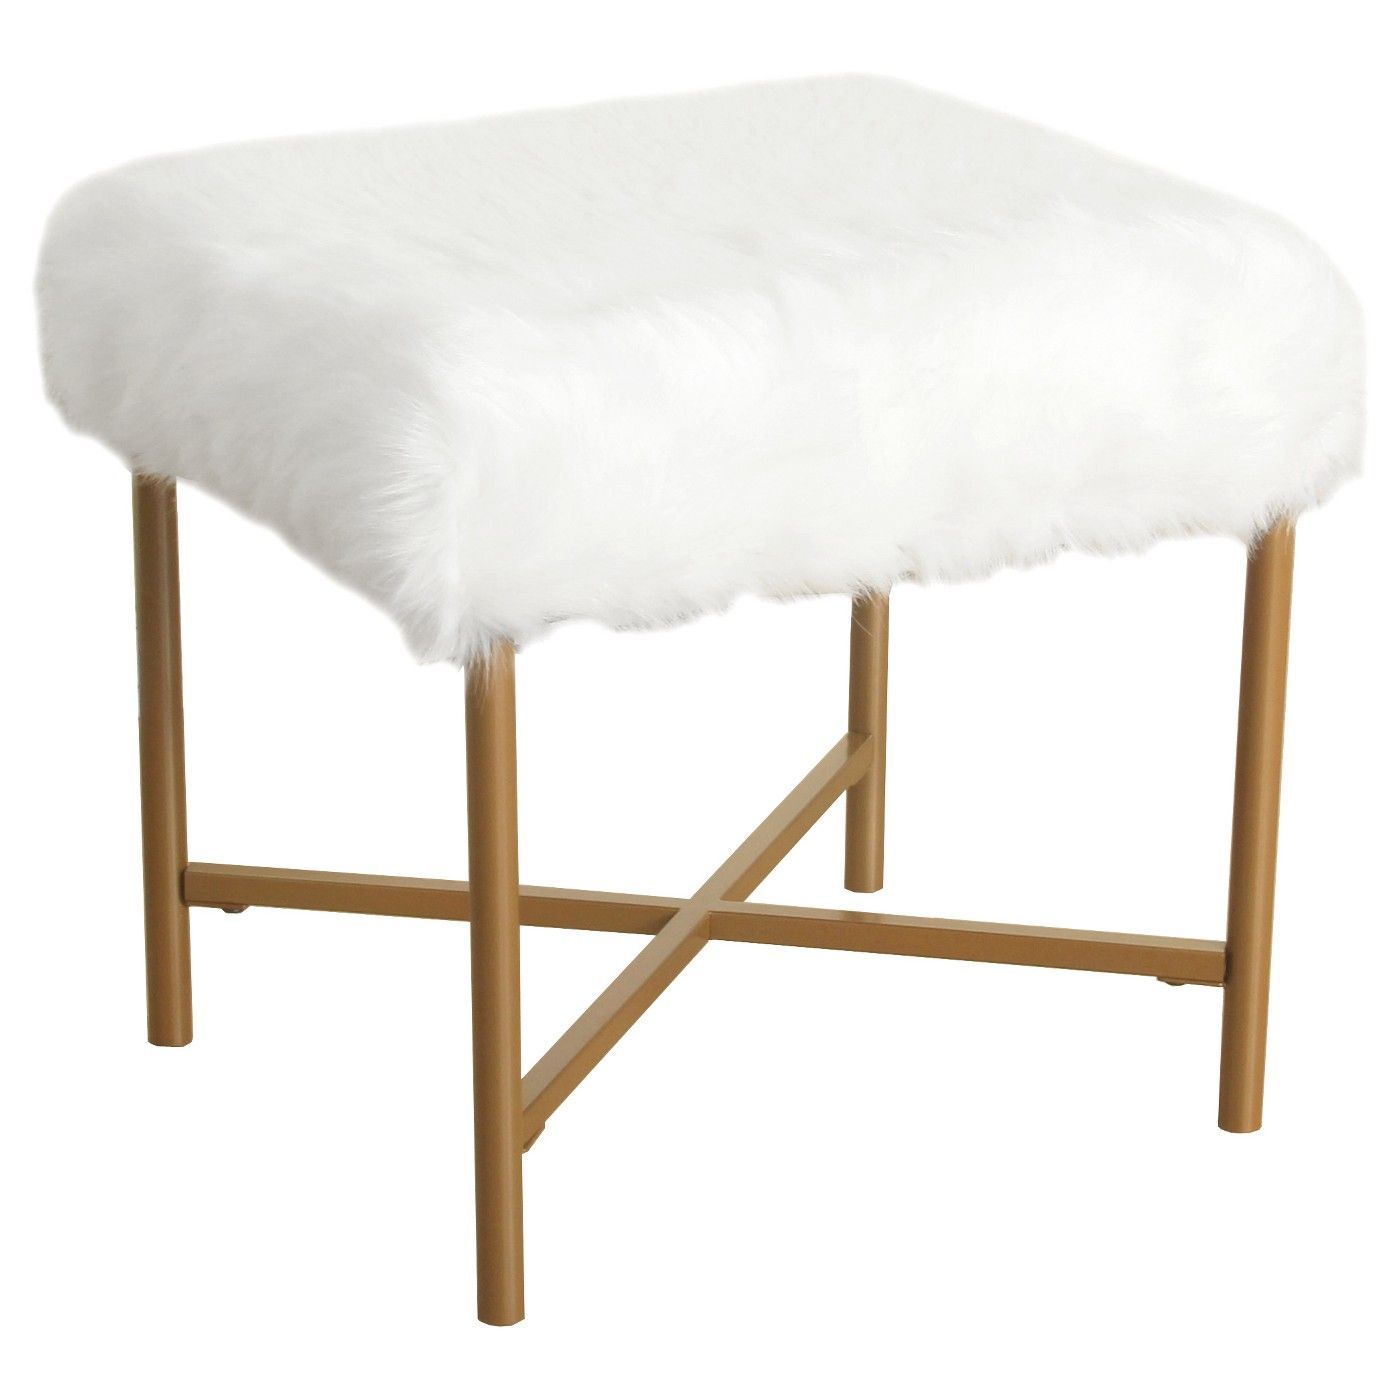 Square Faux Fur Ottoman White – Homepop | Upholstered Stool, Homepop For White Faux Fur Round Ottomans (View 1 of 20)